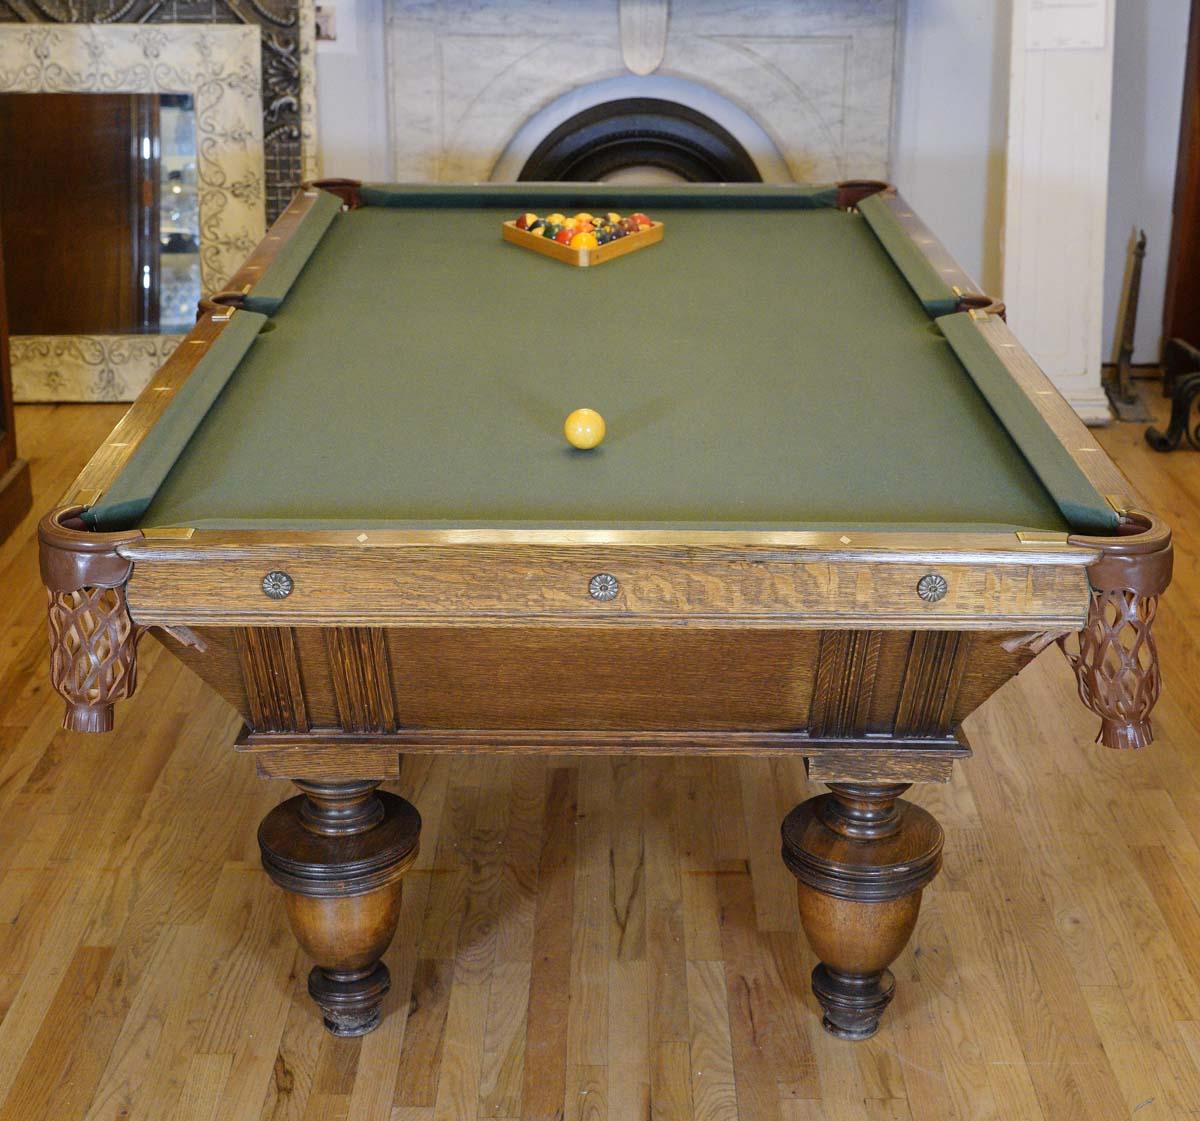 The Brunswick Balke and Collender Co. was a prominent American company founded in 1845 by John Moses Brunswick. Initially, it manufactured billiard tables, becoming a leading supplier of quality billiards and pool tables during the 19th and 20th